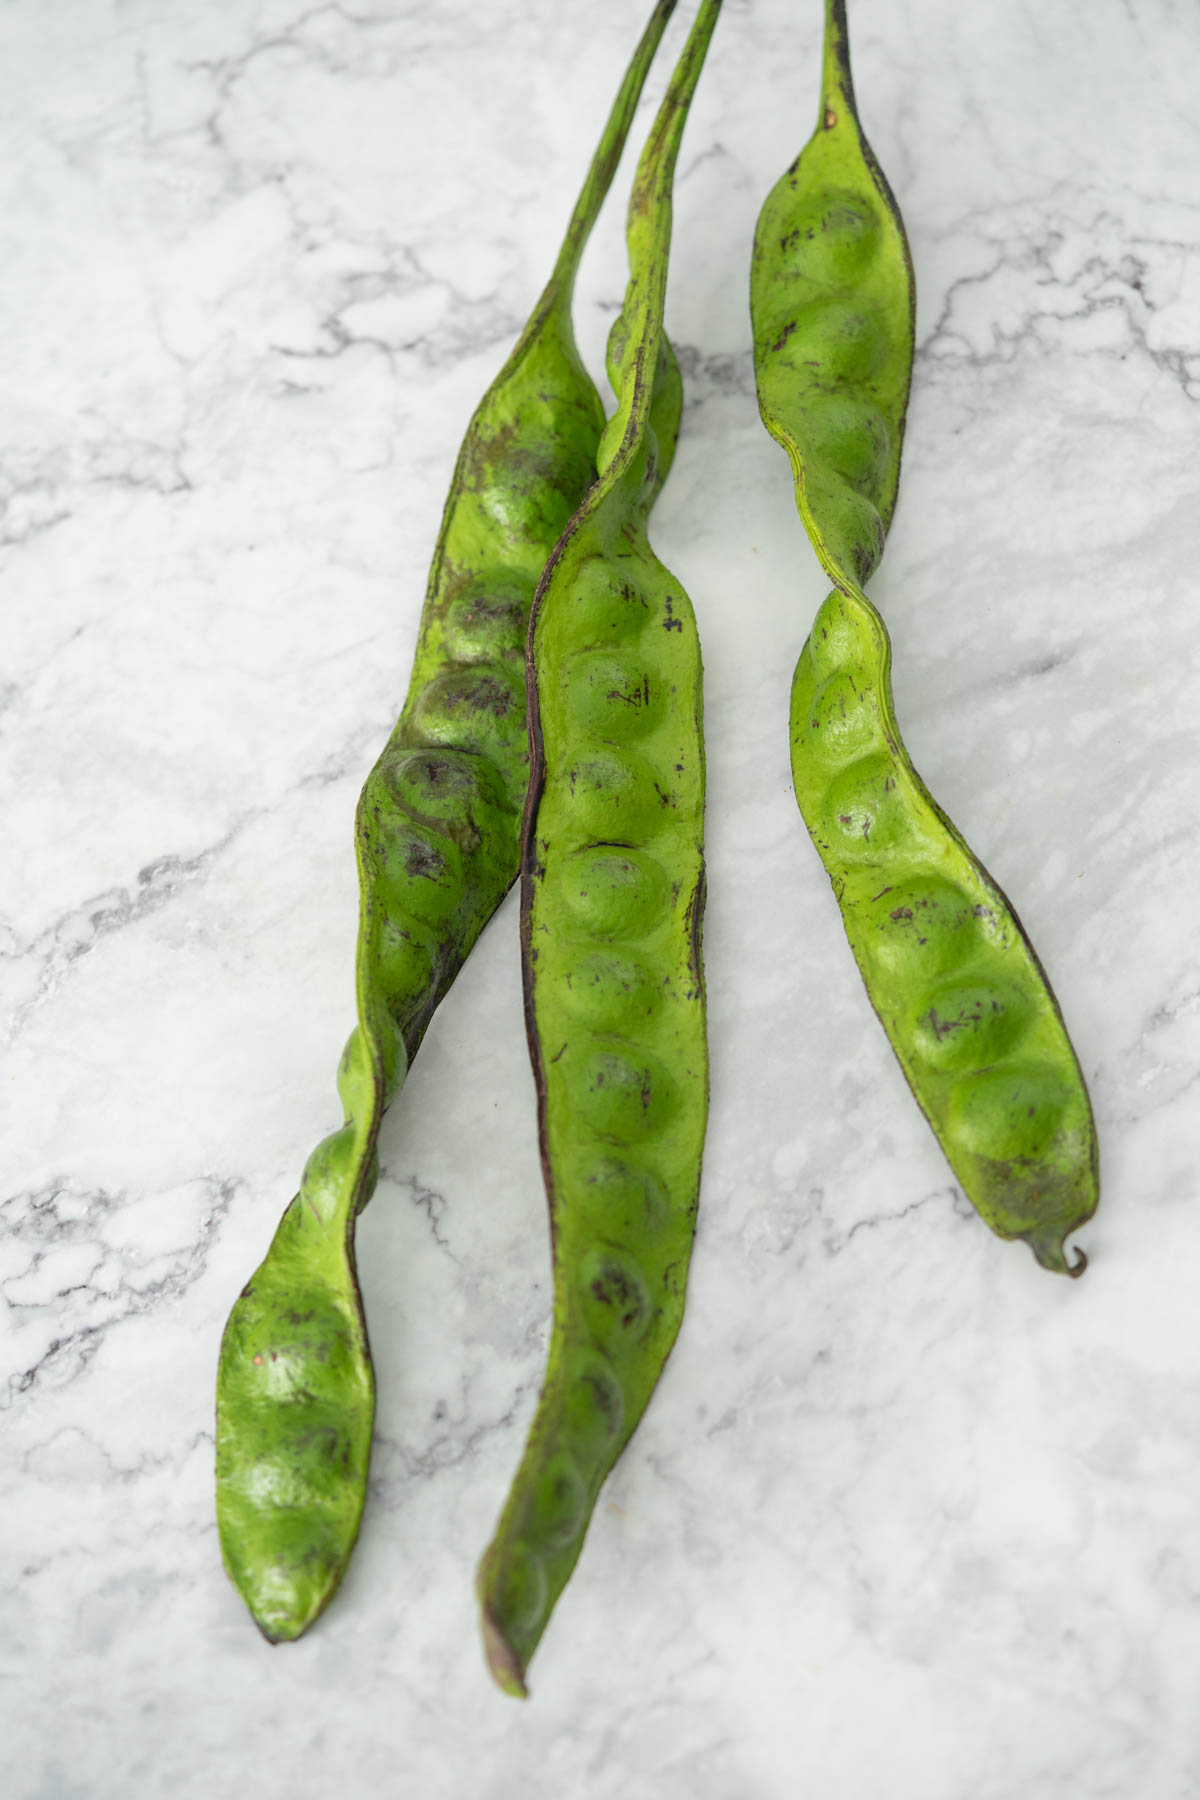 three fresh stink bean pods on a marble surface